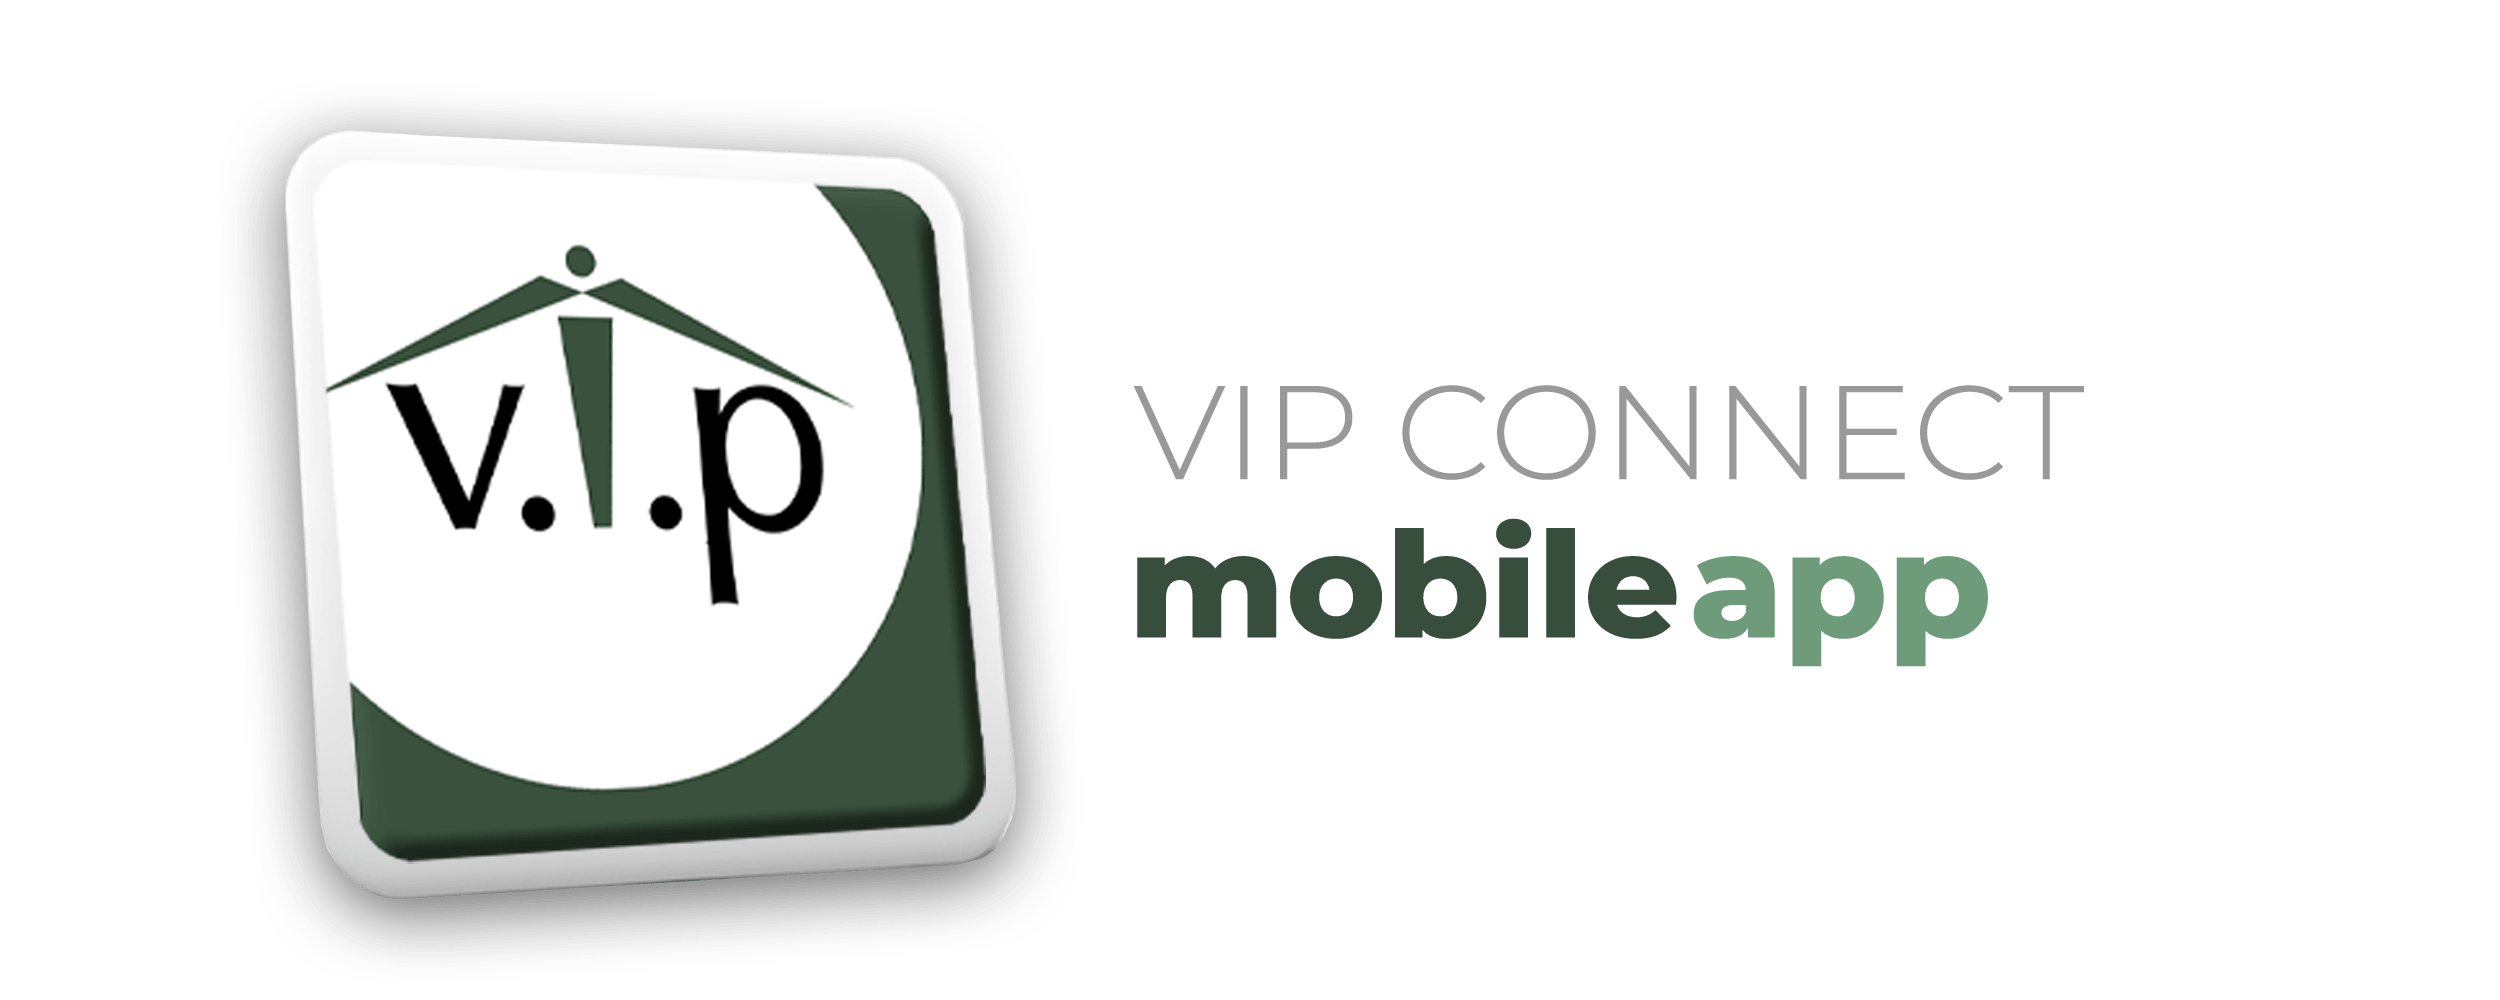 vip connect